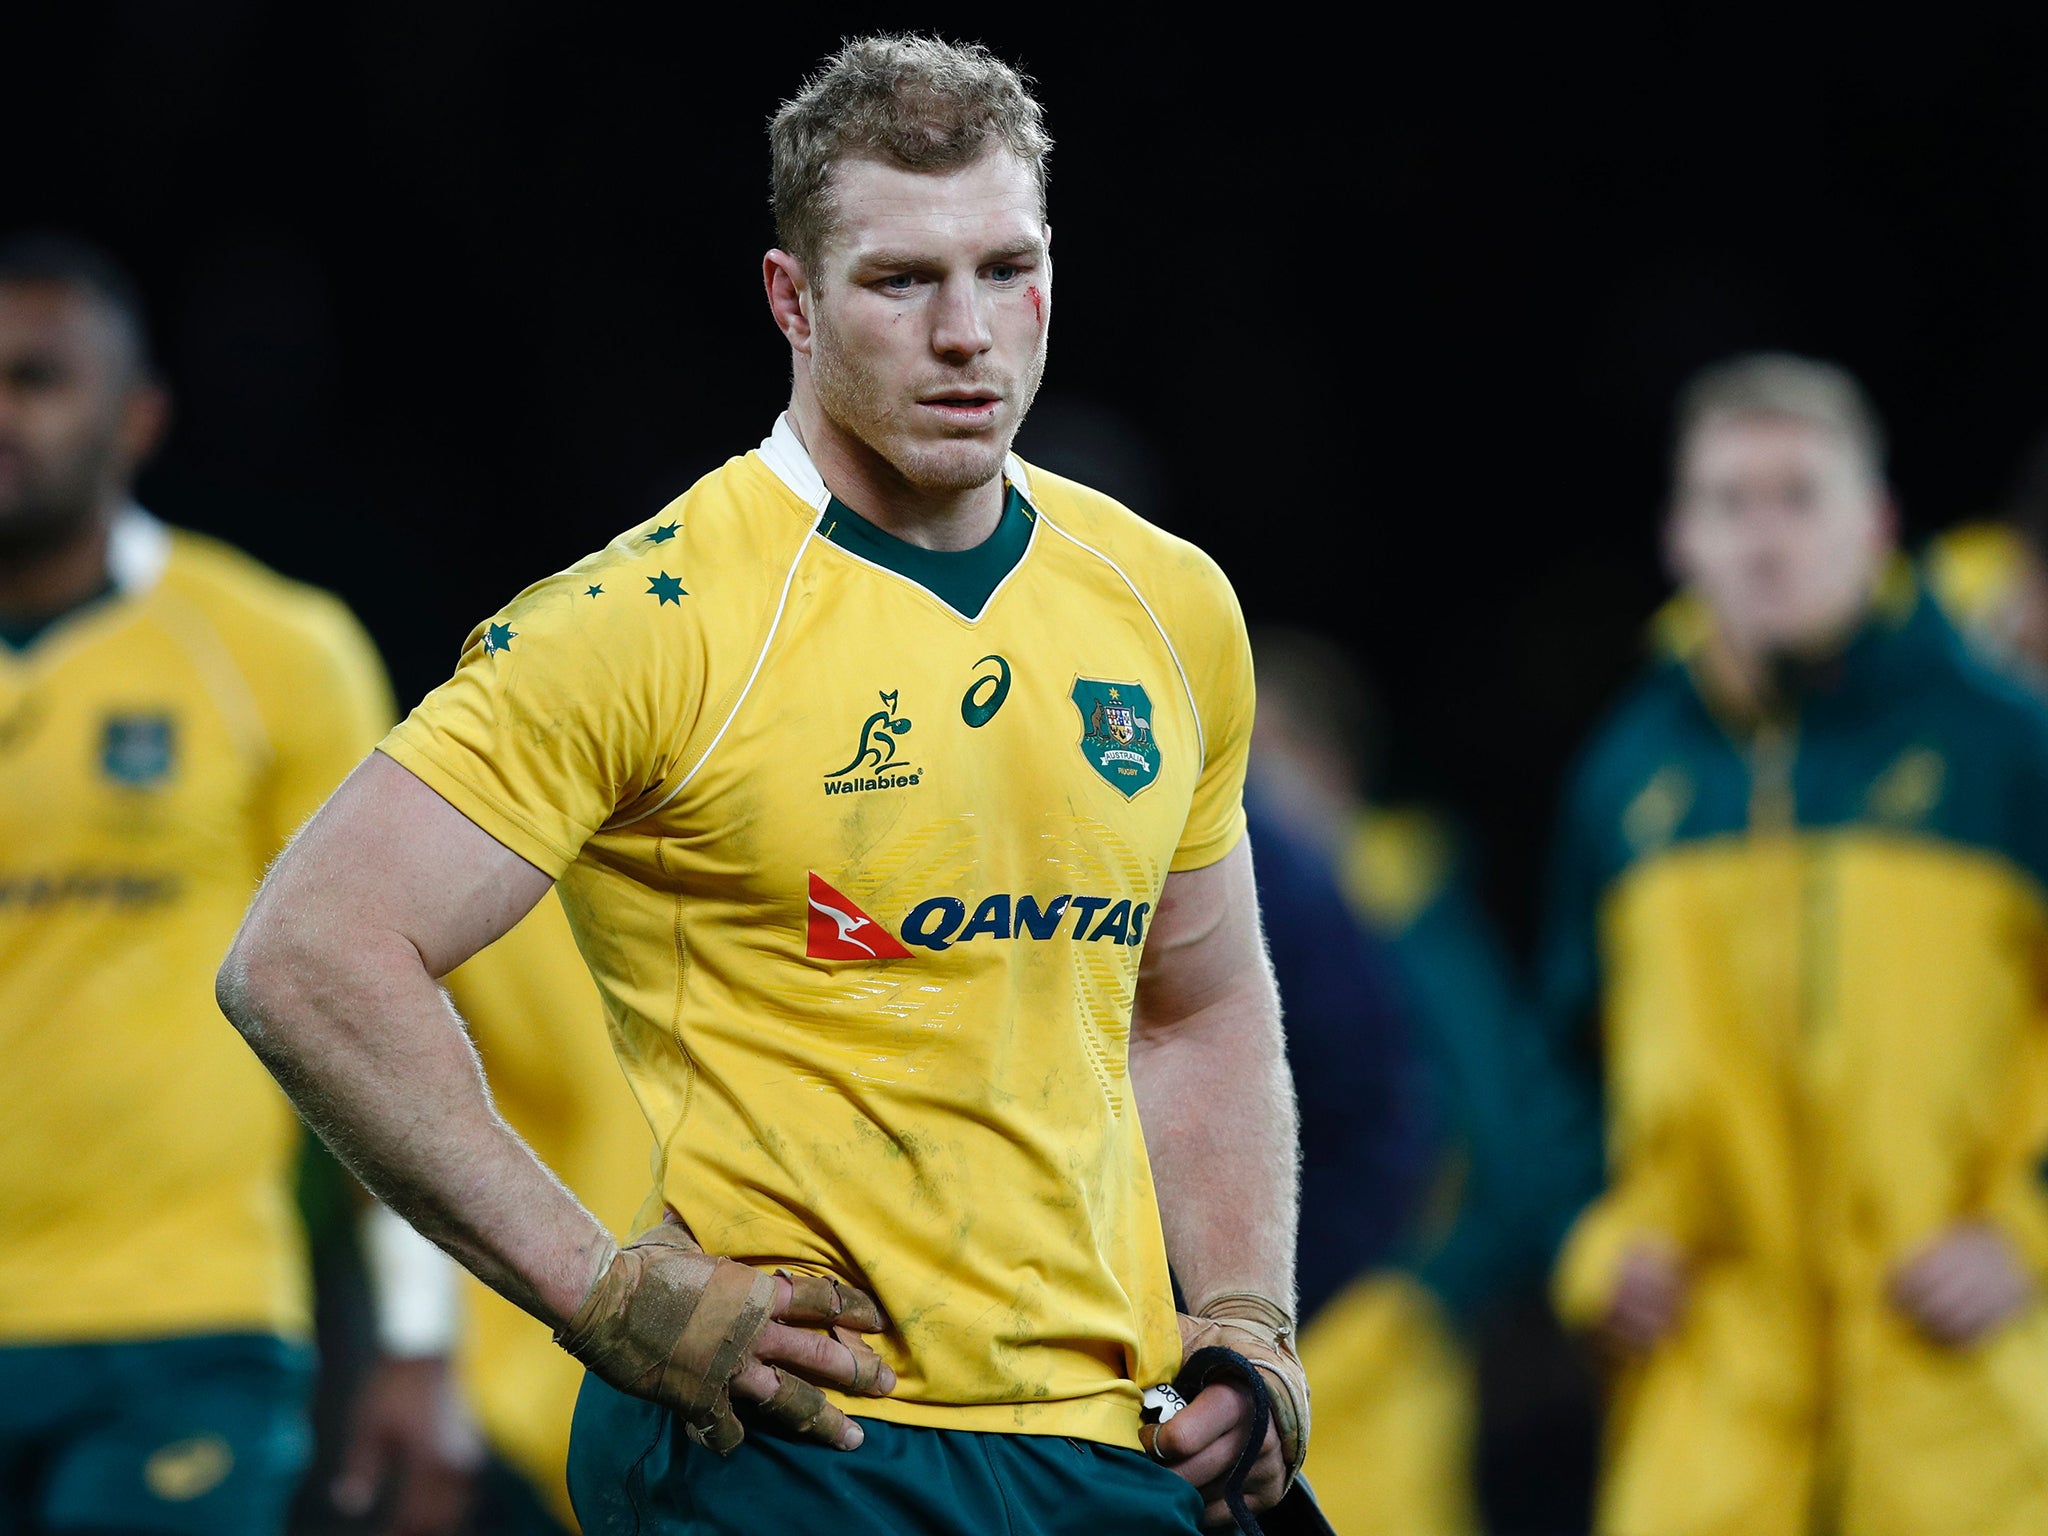 Pocock has not played for the Wallabies since the December 2016 defeat by England